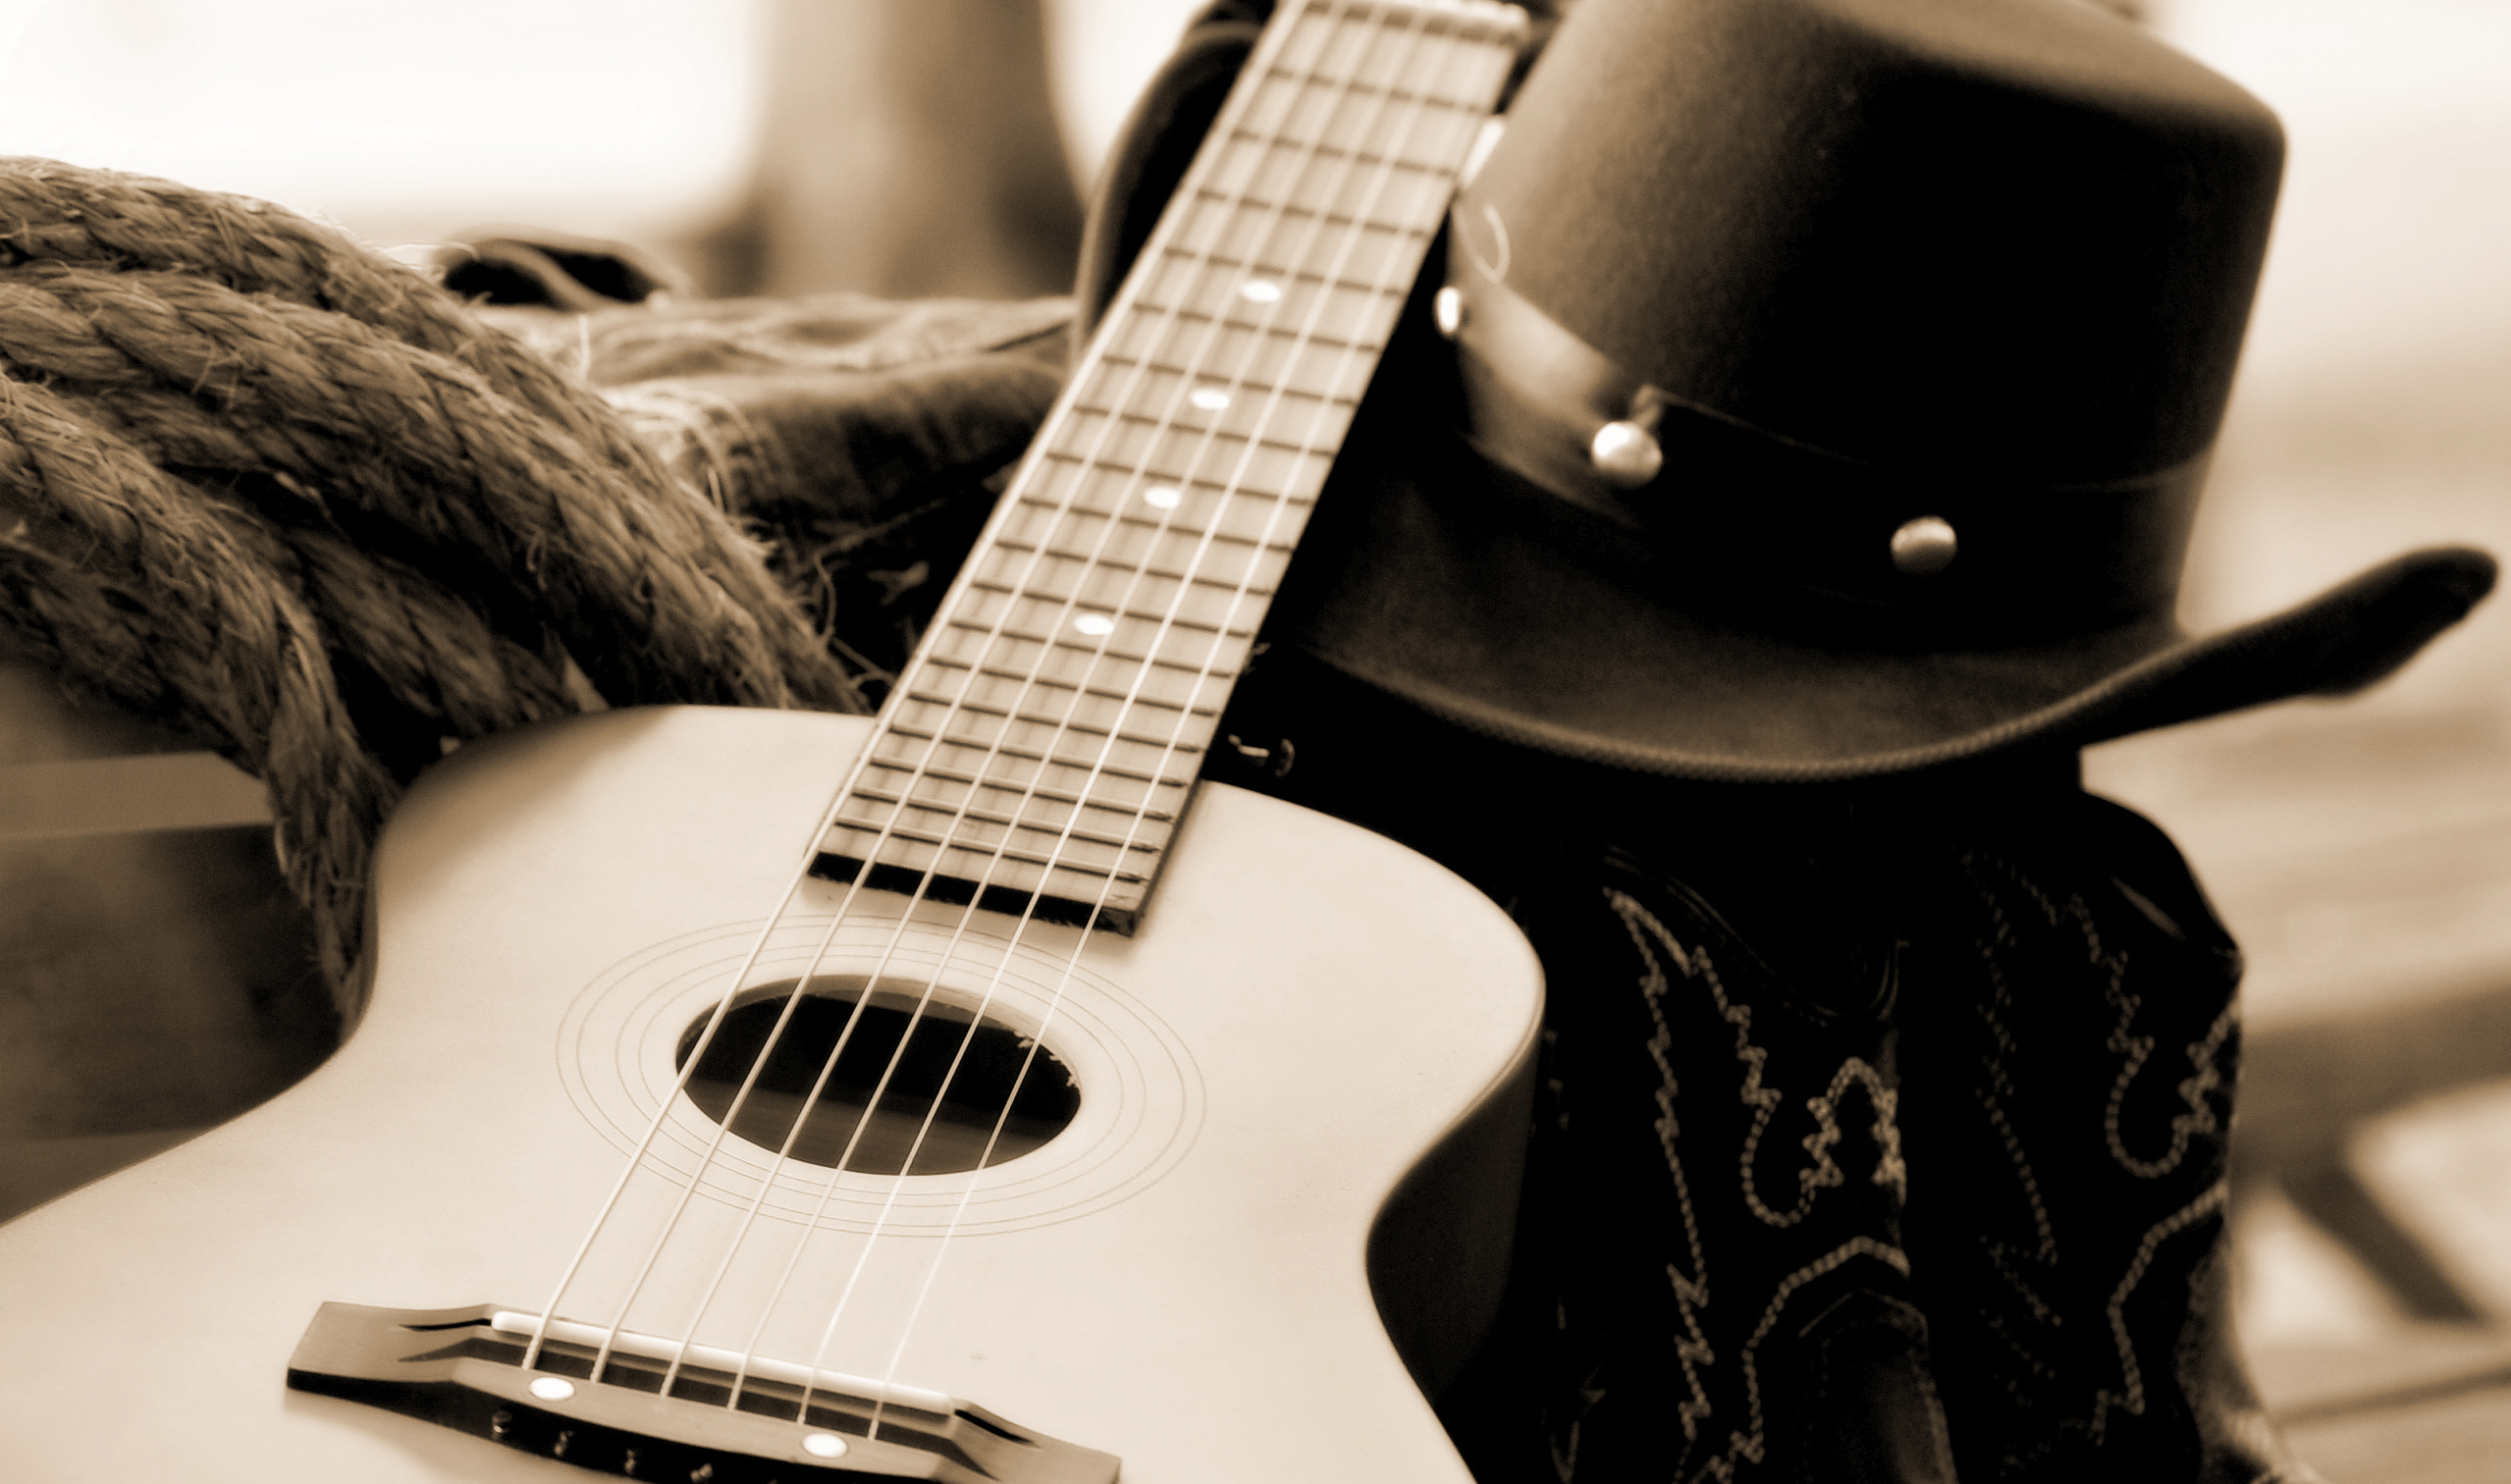 An acoustic guitar, cowboy hat and boots